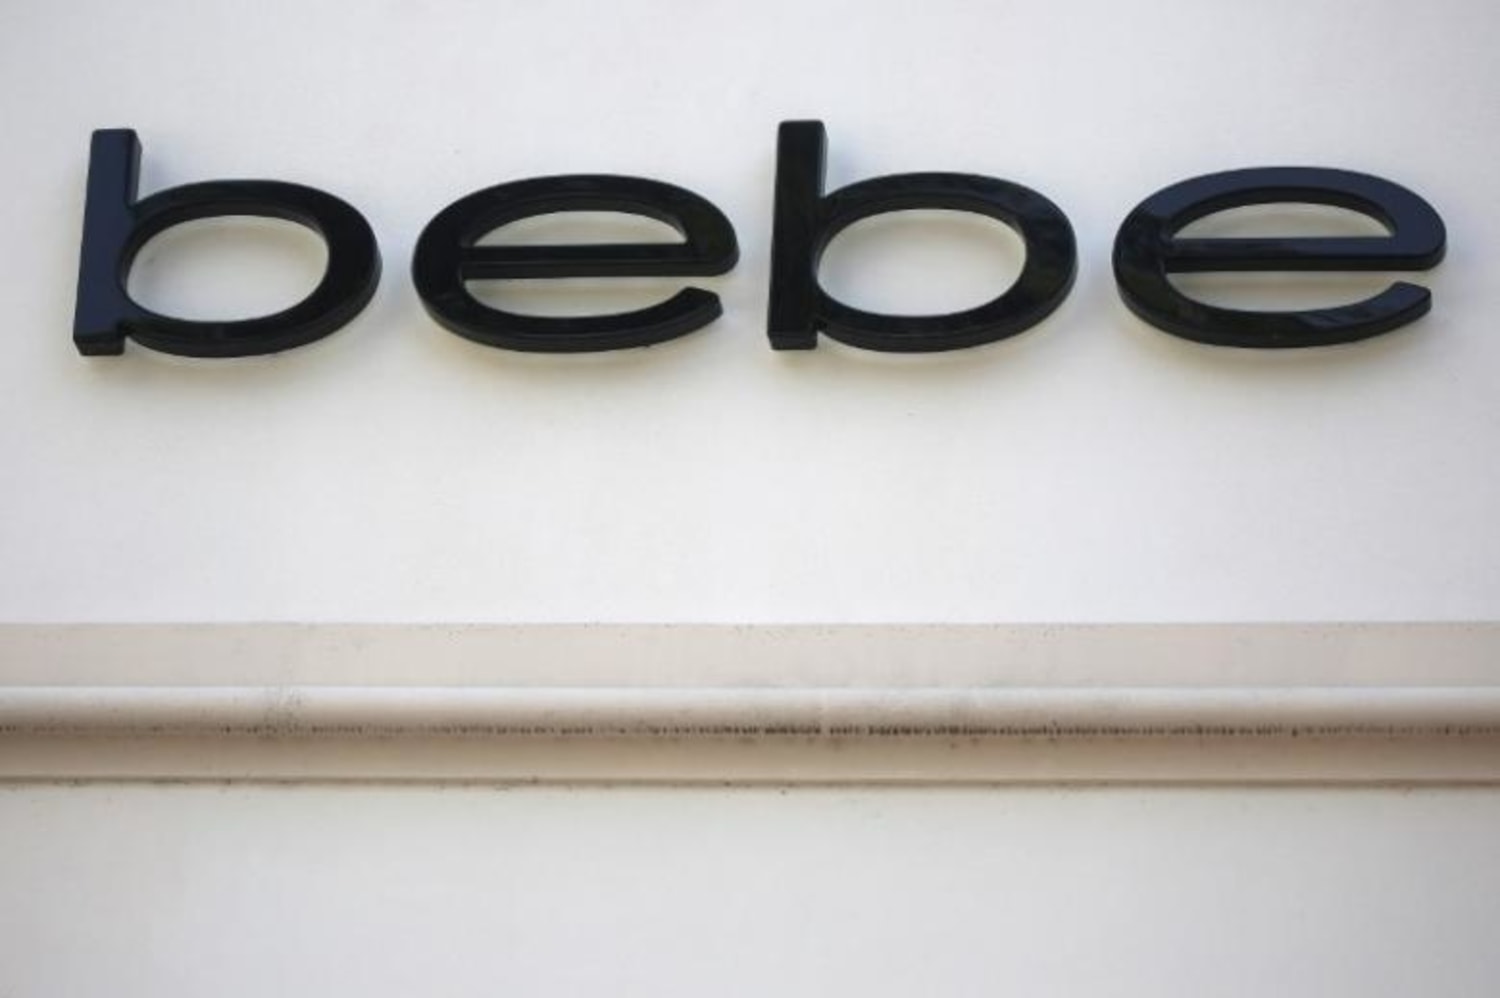 Bebe to Close Stores to Focus on E-Commerce, Report Says